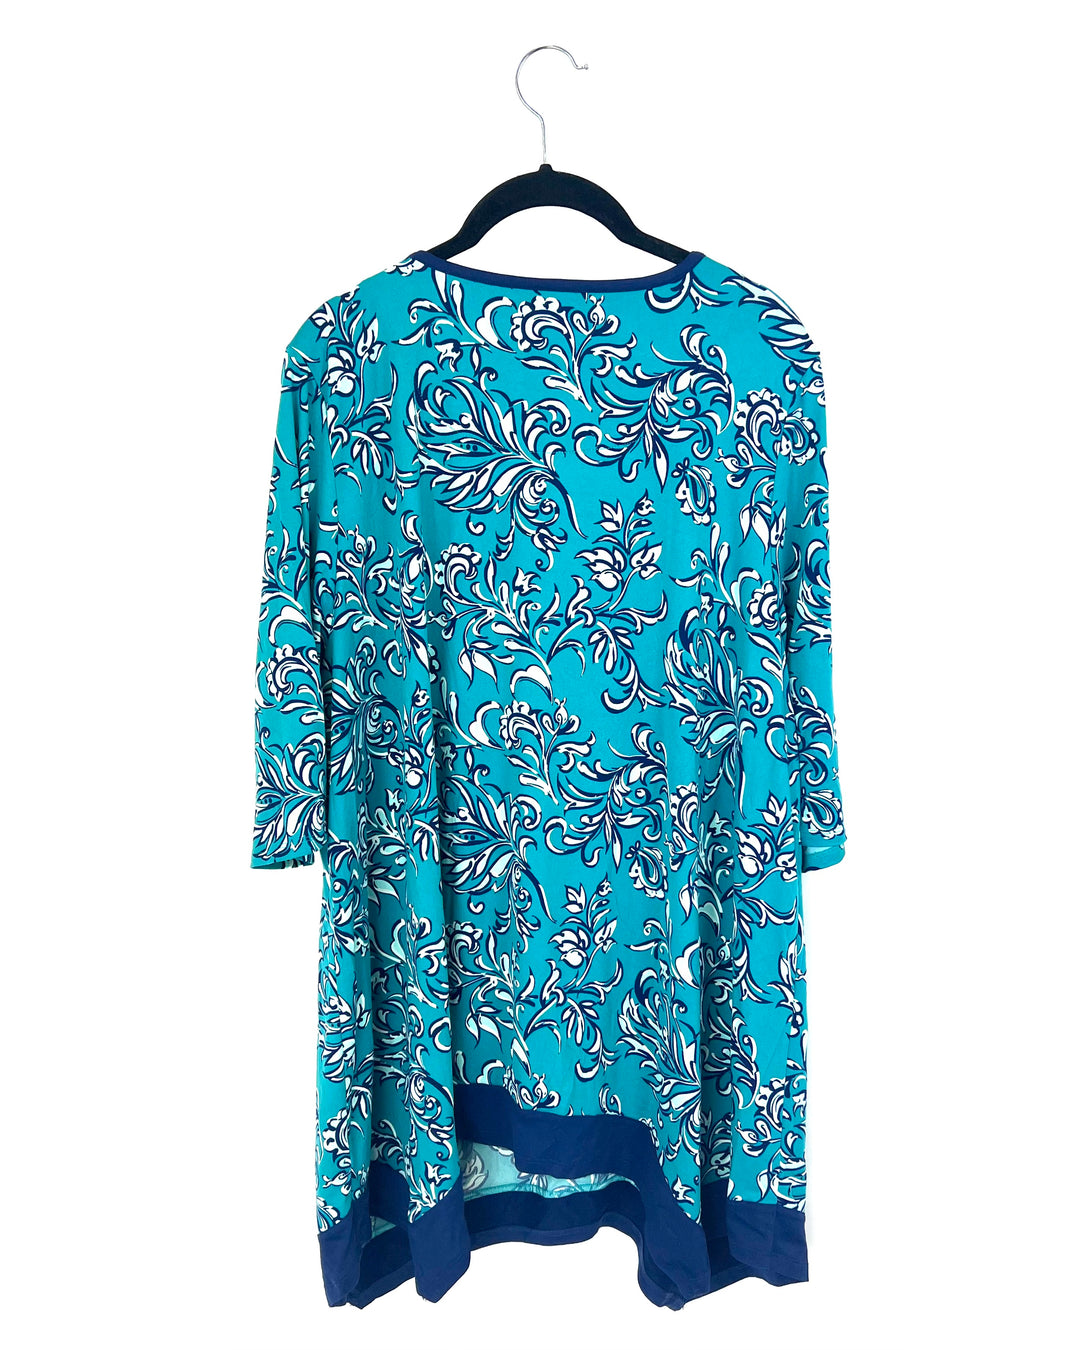 Teal Printed Nightgown -  1X